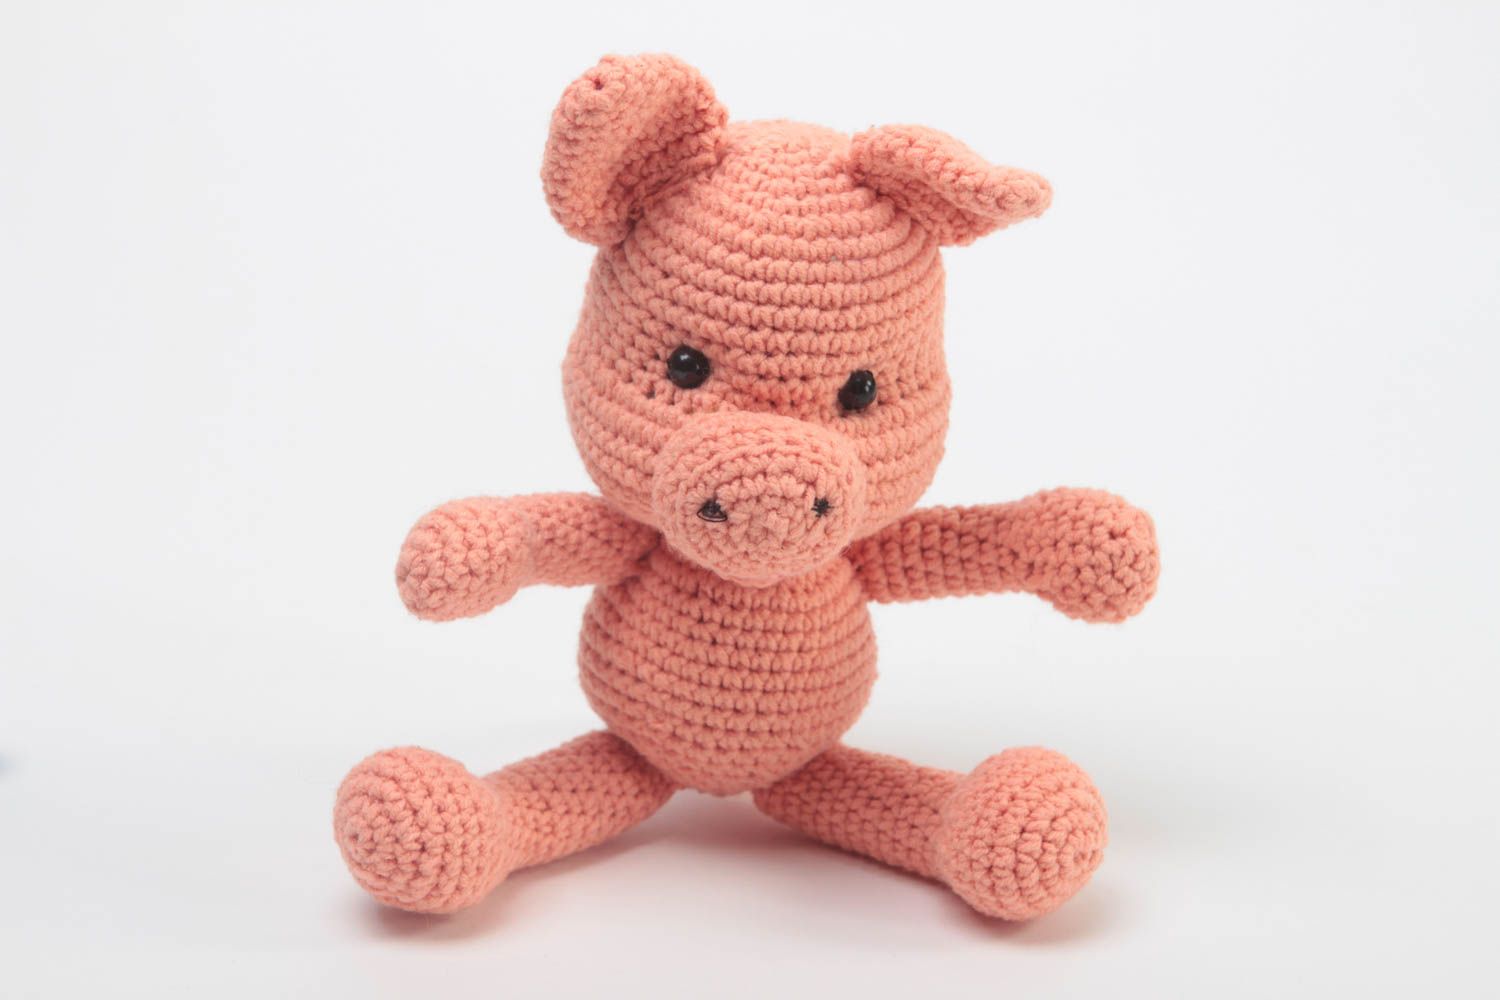 Pink crocheted toy soft handmade toy stylish interior decor cute gift toy photo 2